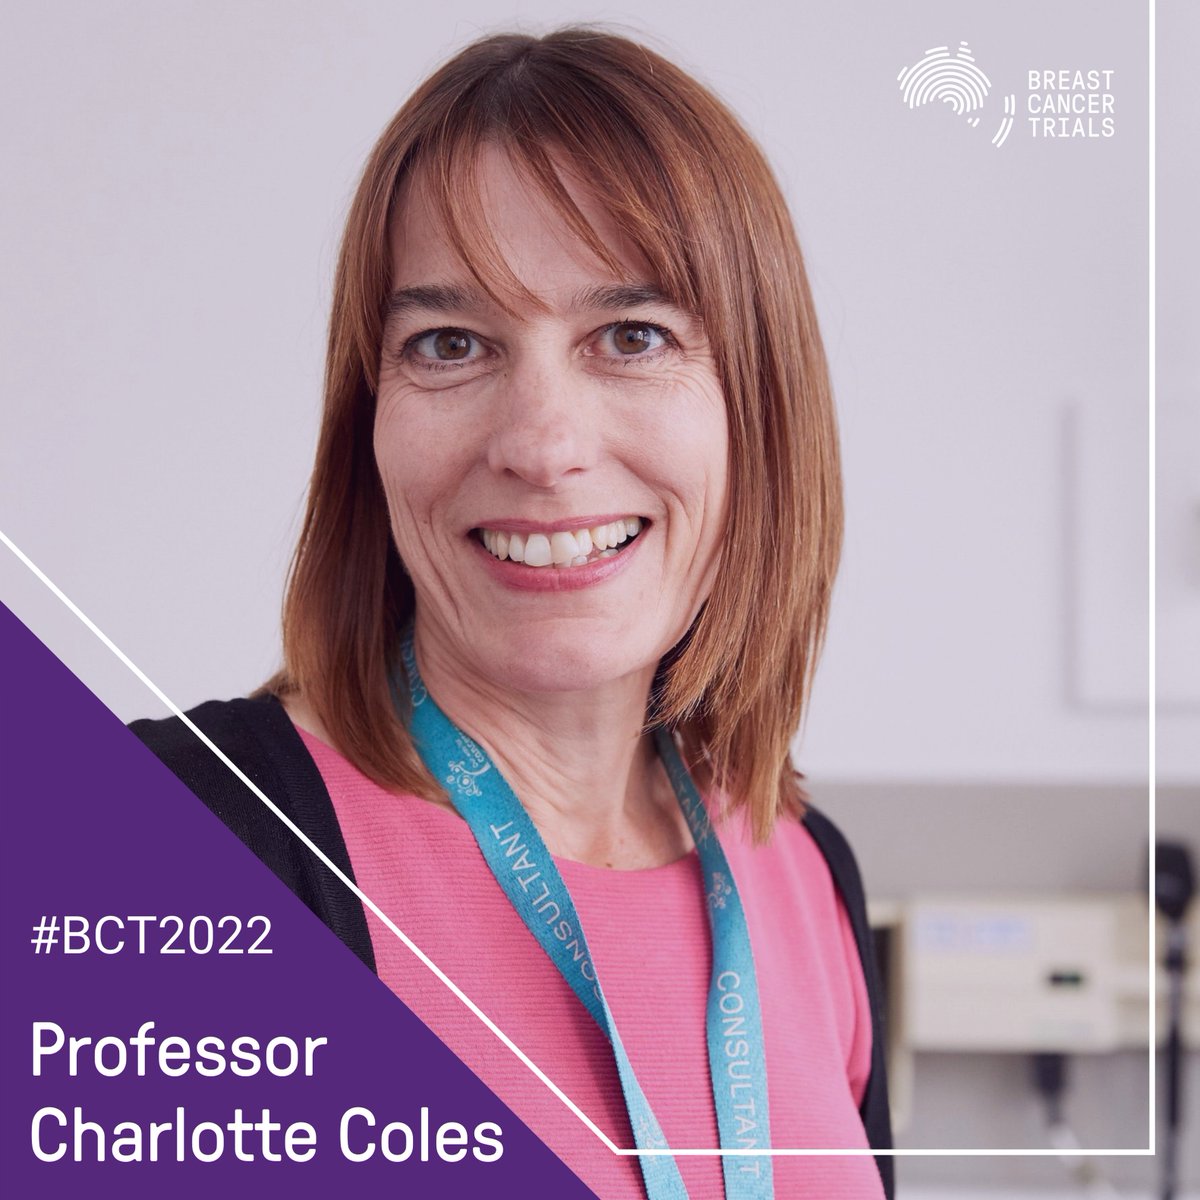 During BCT's 43rd ASM, we recorded interviews with International Guest Speakers on their research. Charlotte Coles is a Professor of Breast Cancer Clinical Oncology at the University of Cambridge. Click the link to watch Professor Charlotte Coles’ video. youtube.com/watch?v=KQQZl6…